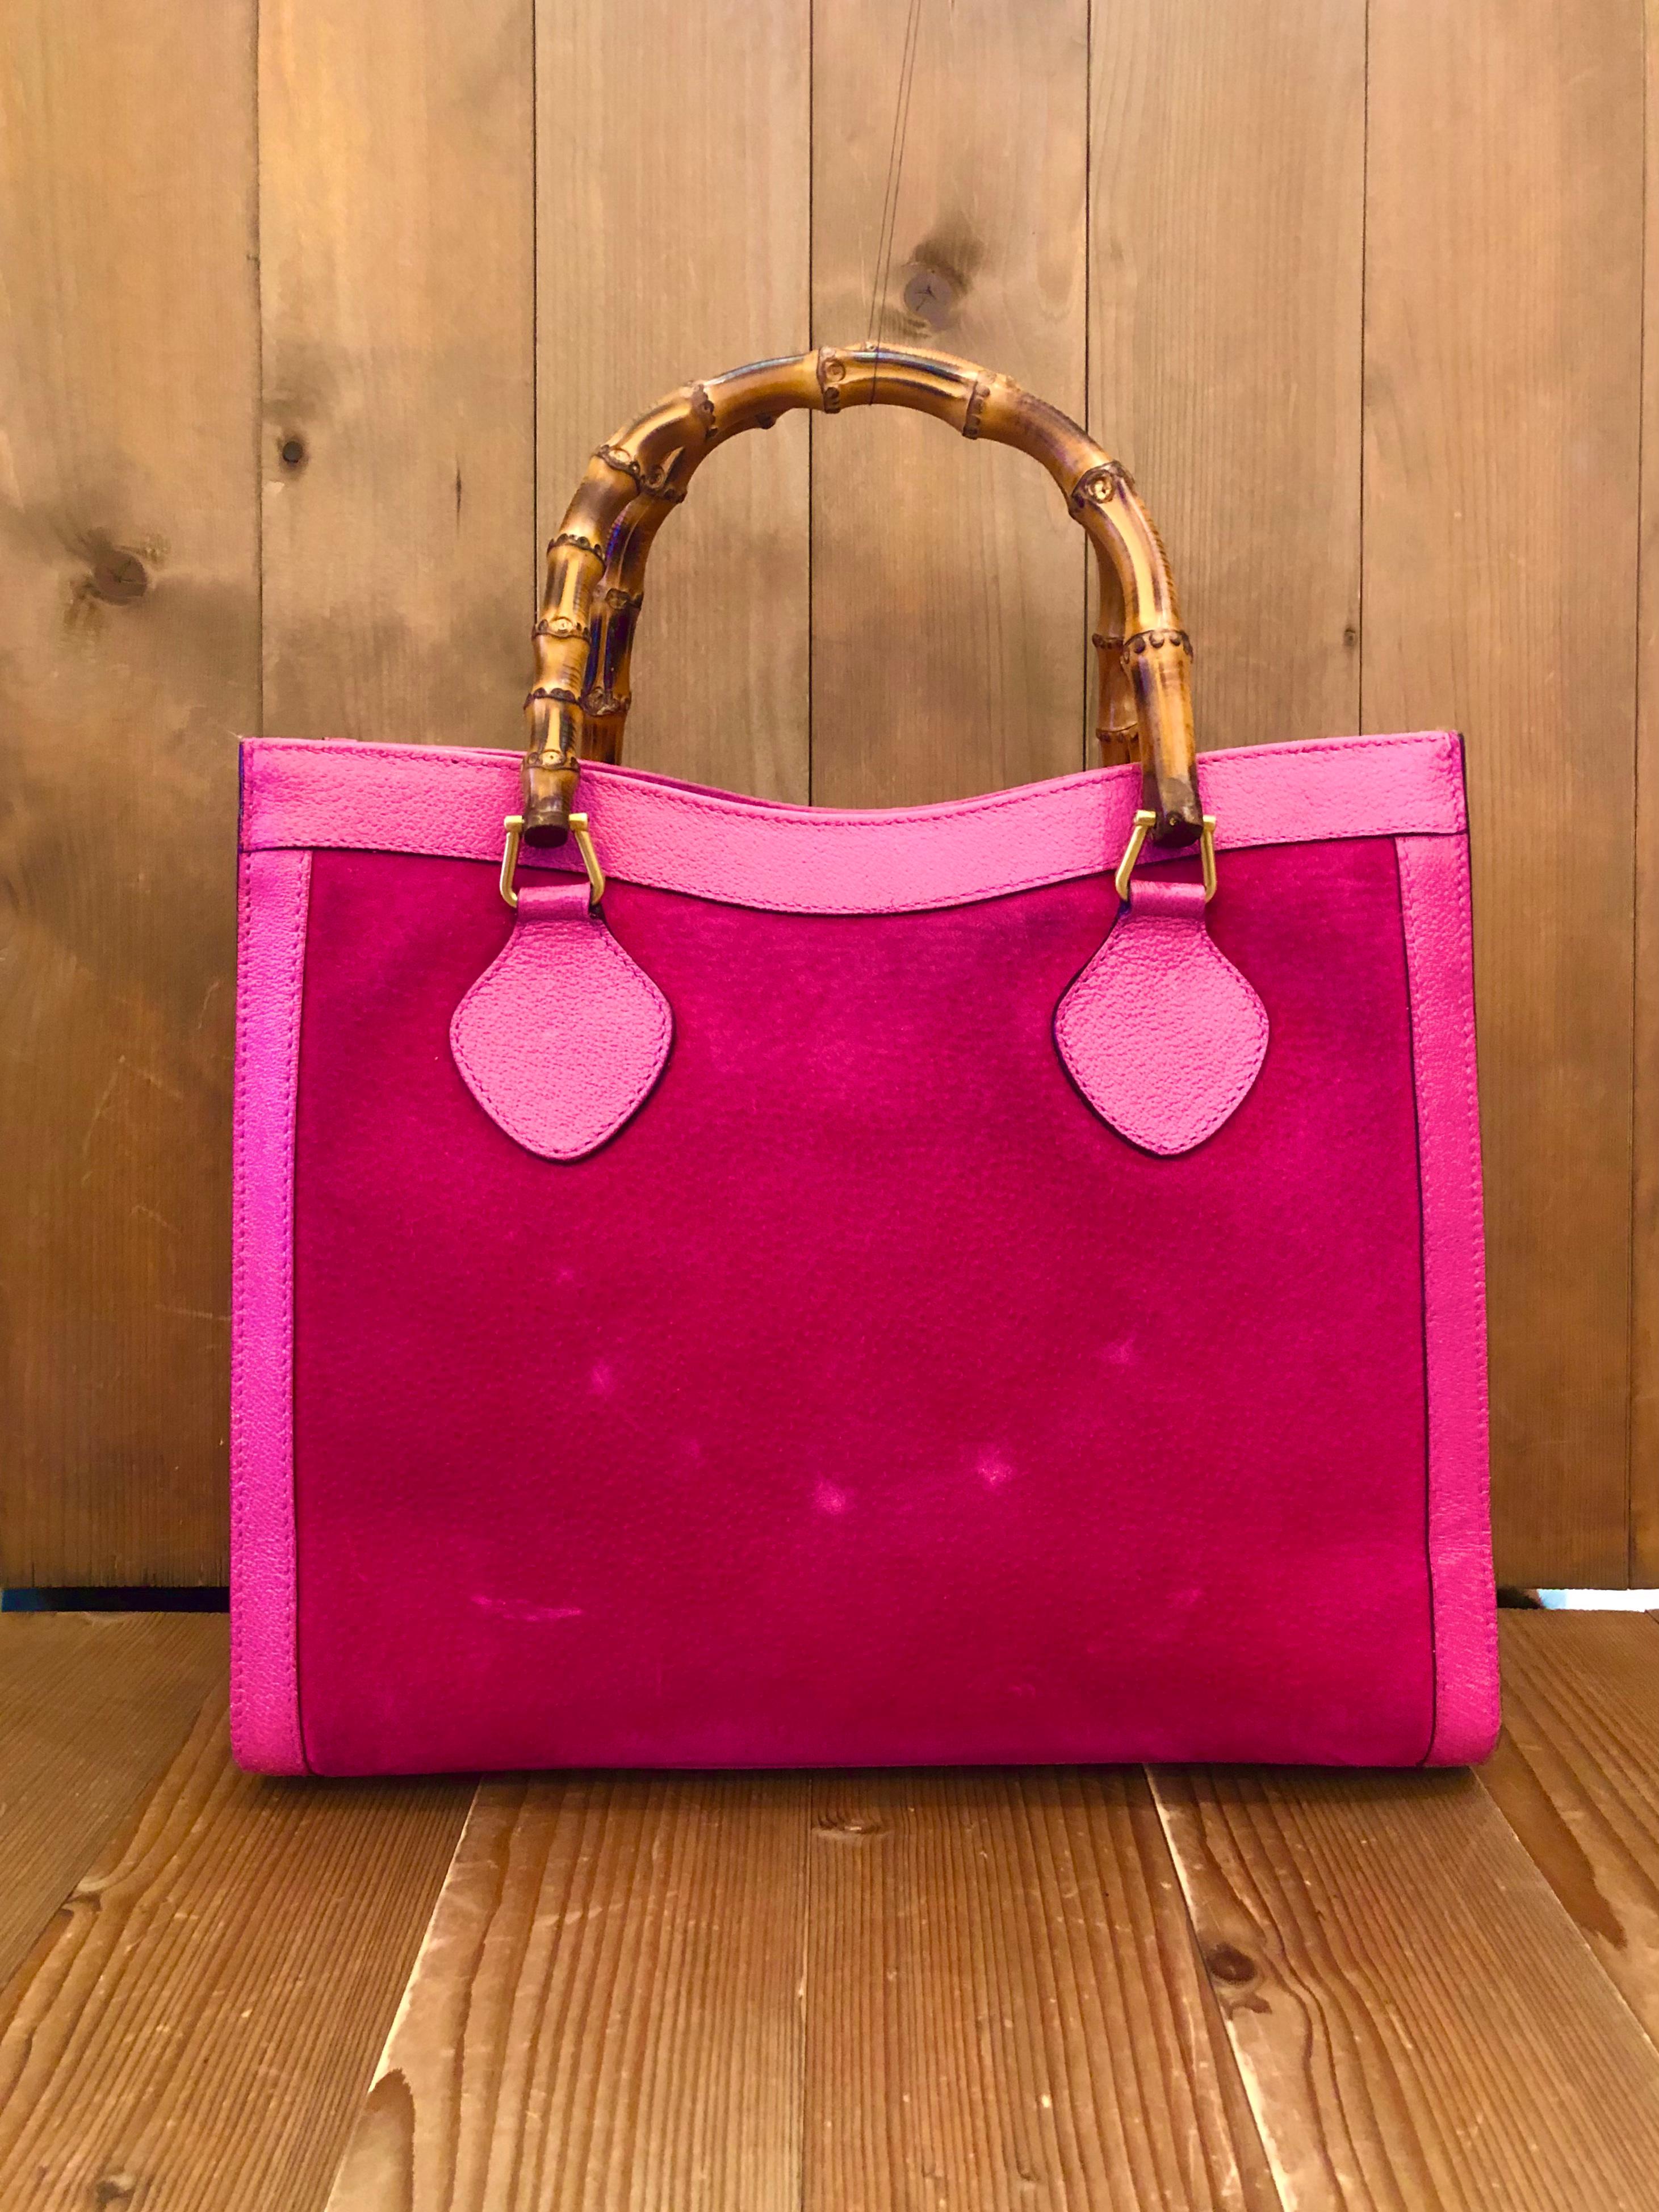 This vintage GUCCI Diana bamboo tote is crafted of pigskin’s leather and suede in hot pink and matt gold toned hardware. Top magnetic snap closure opens to a new interior in beige. It features two main compartments with one zippered compartment in